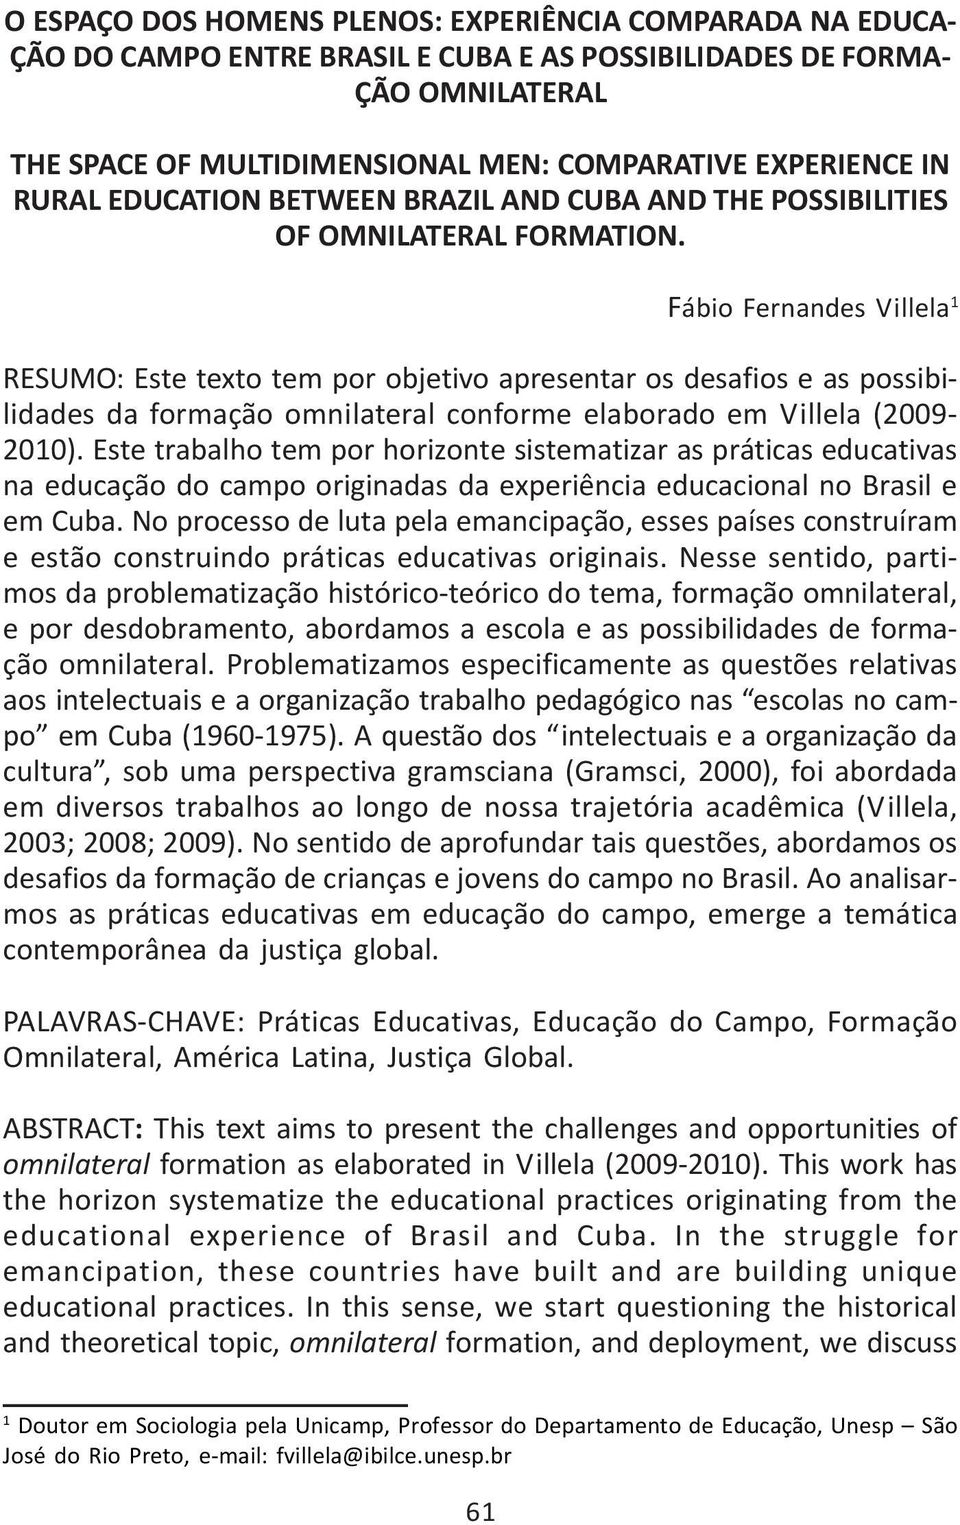 MULTIDIMENSIONAL MEN: COMPARATIVE EXPERIENCE IN RURAL EDUCATION BETWEEN BRAZIL AND CUBA AND THE POSSIBILITIES OF OMNILATERAL FORMATION.